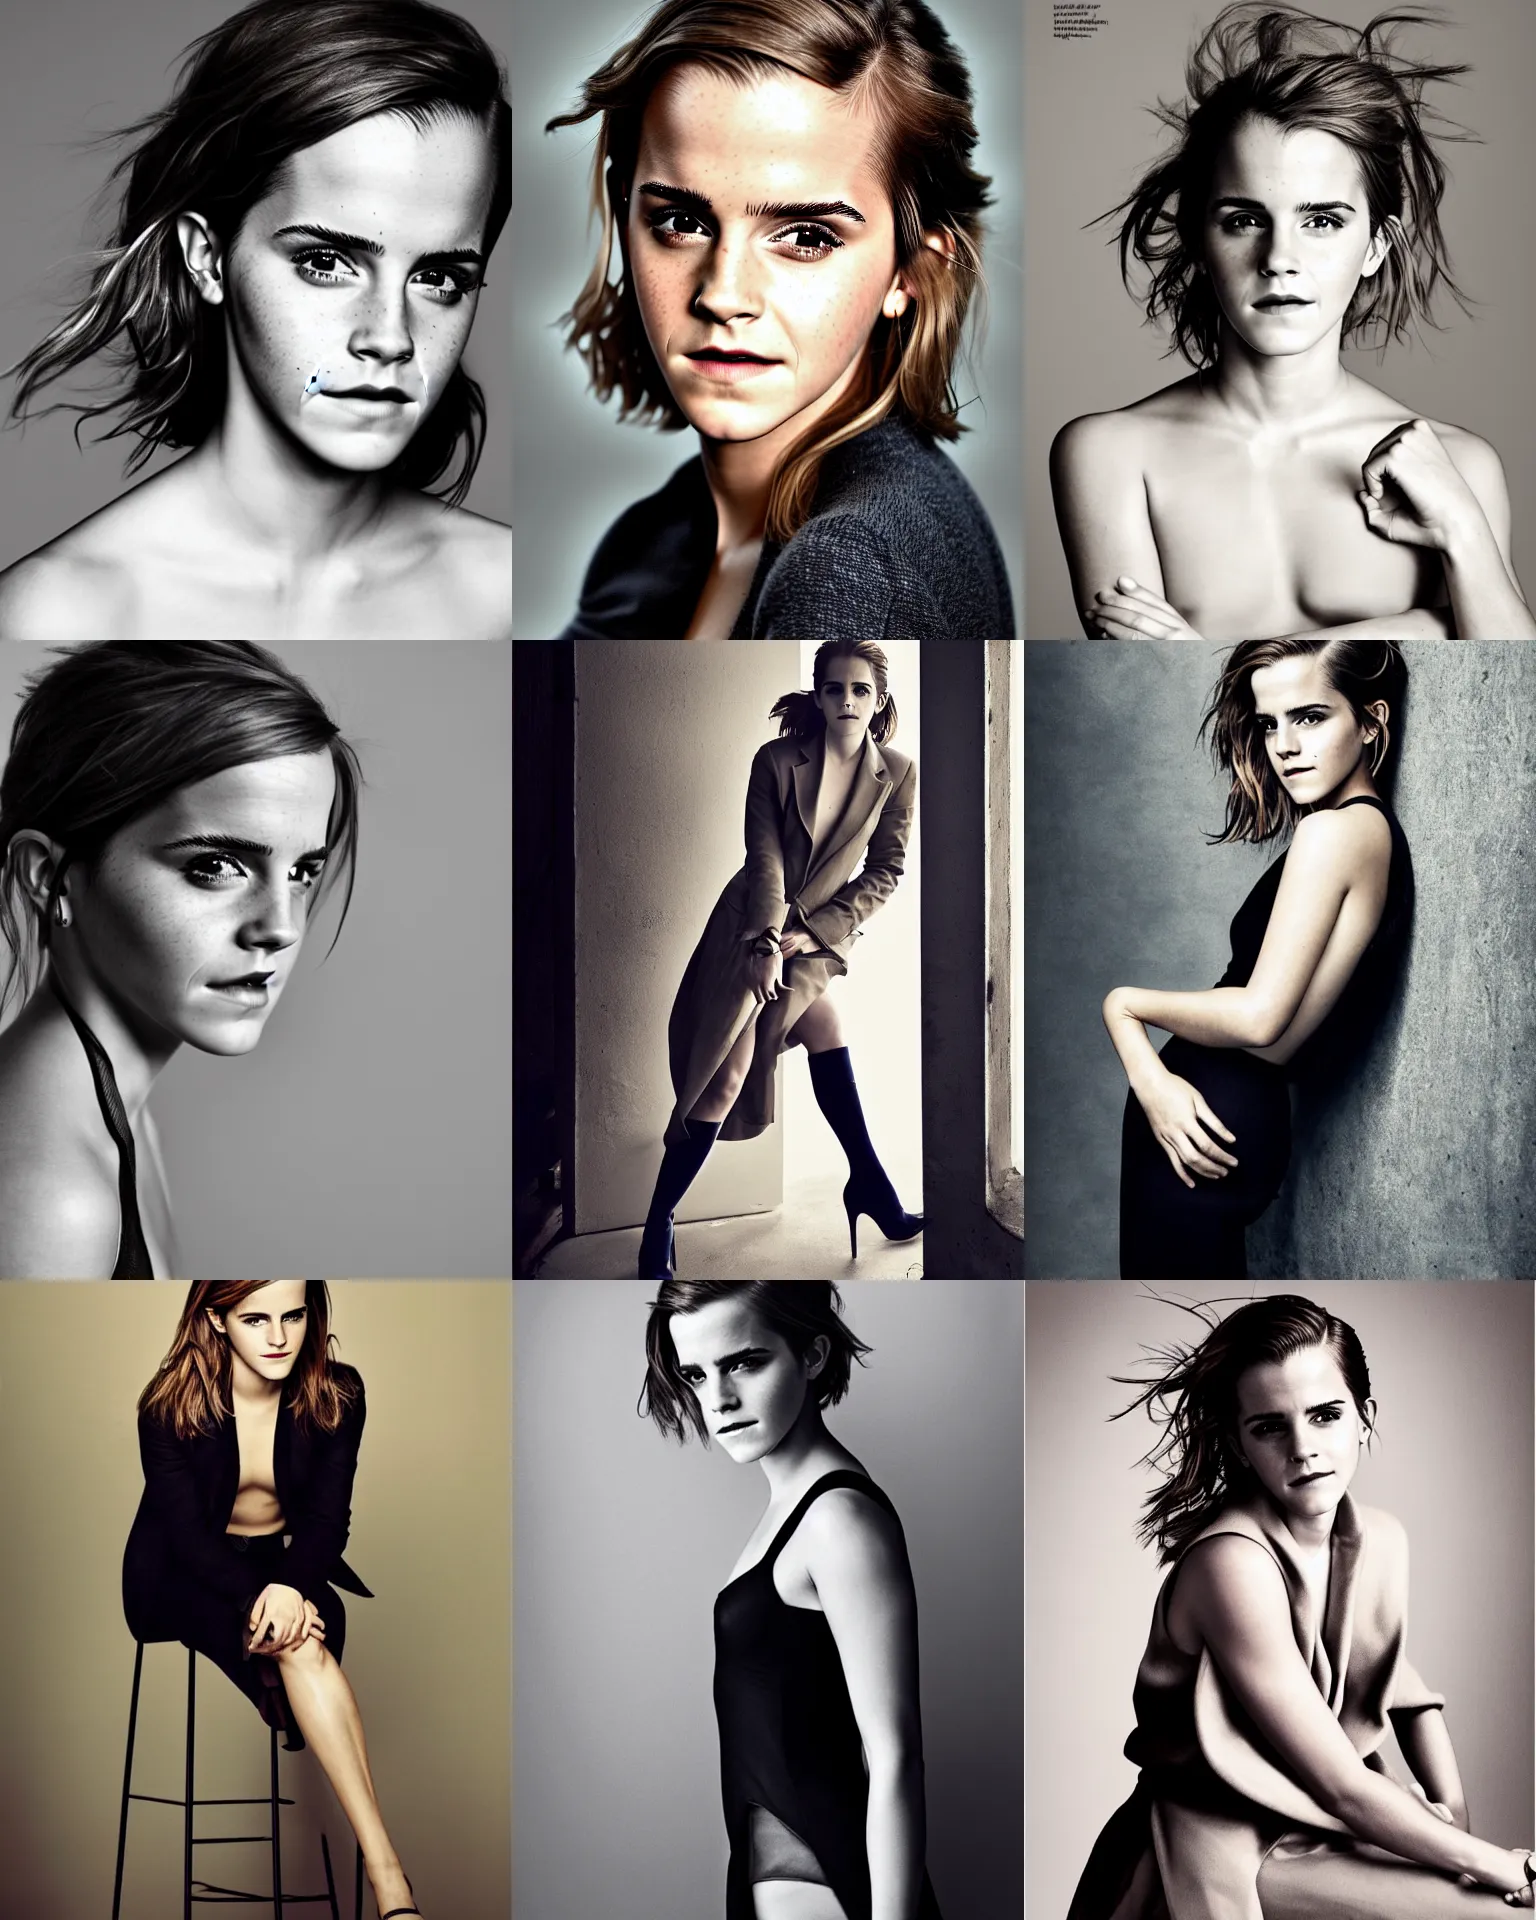 Prompt: Emma Watson professional studio photo by Annie Leibovitz, Peter Hurley, Steve Mccurry, for GQ, perfect face, full length shot, soft studio lighting, award-winning photography